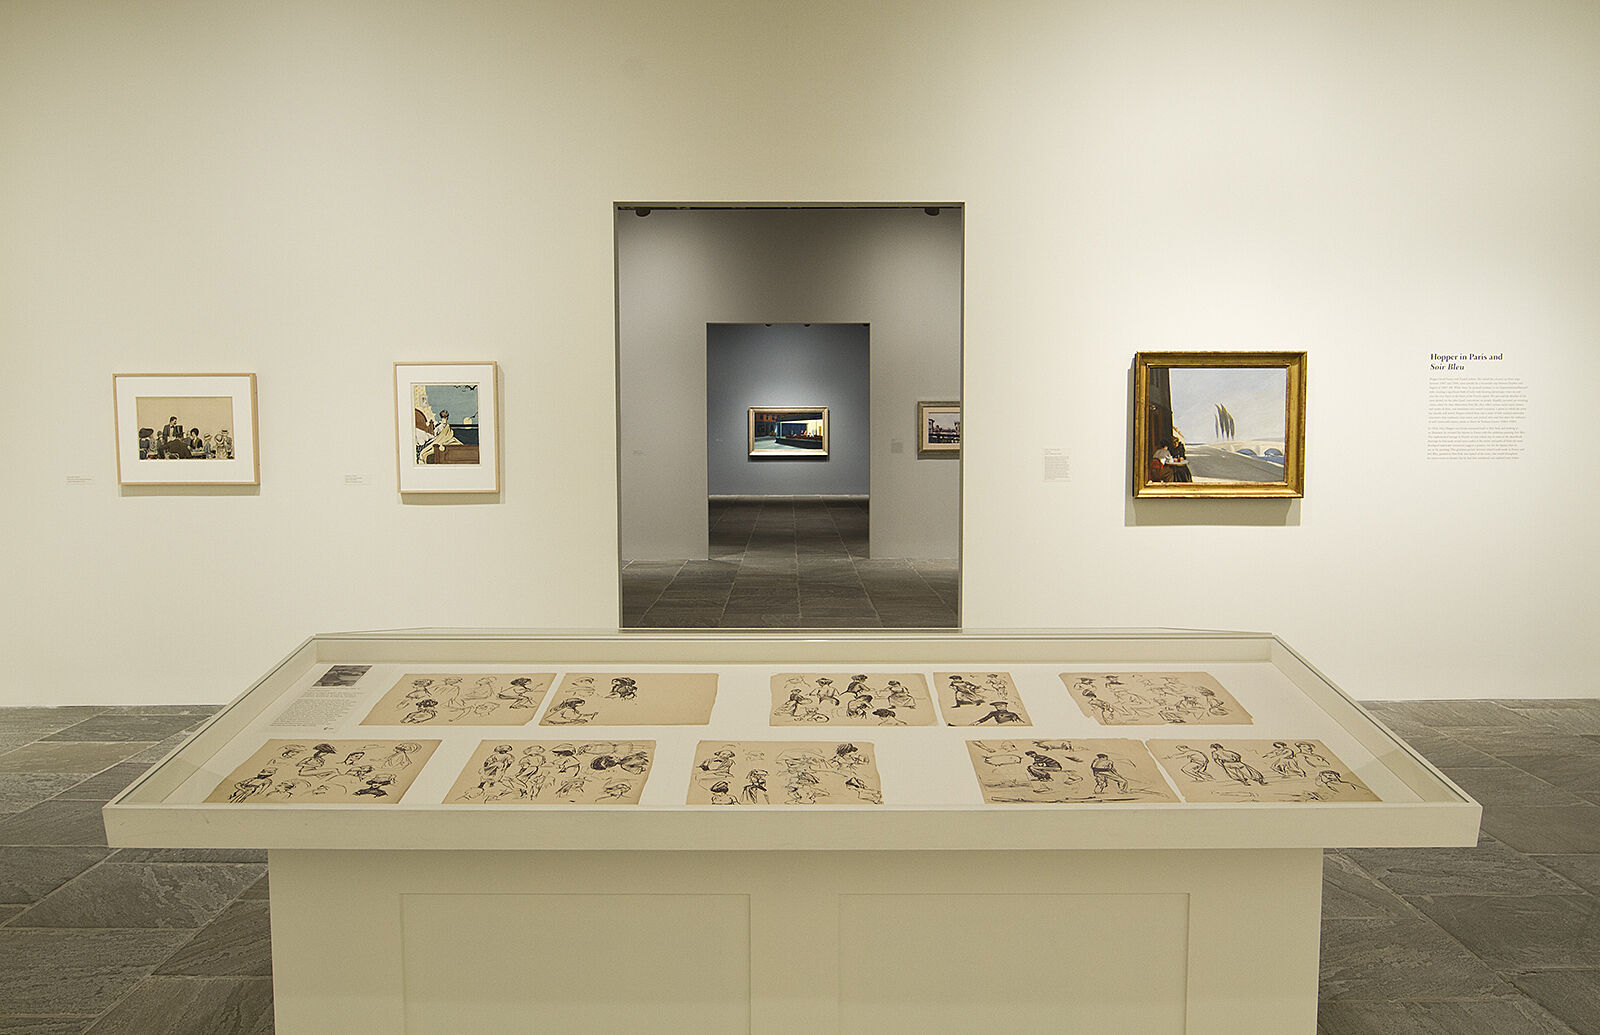 Sketches displayed in cases with paintings just beyond them.